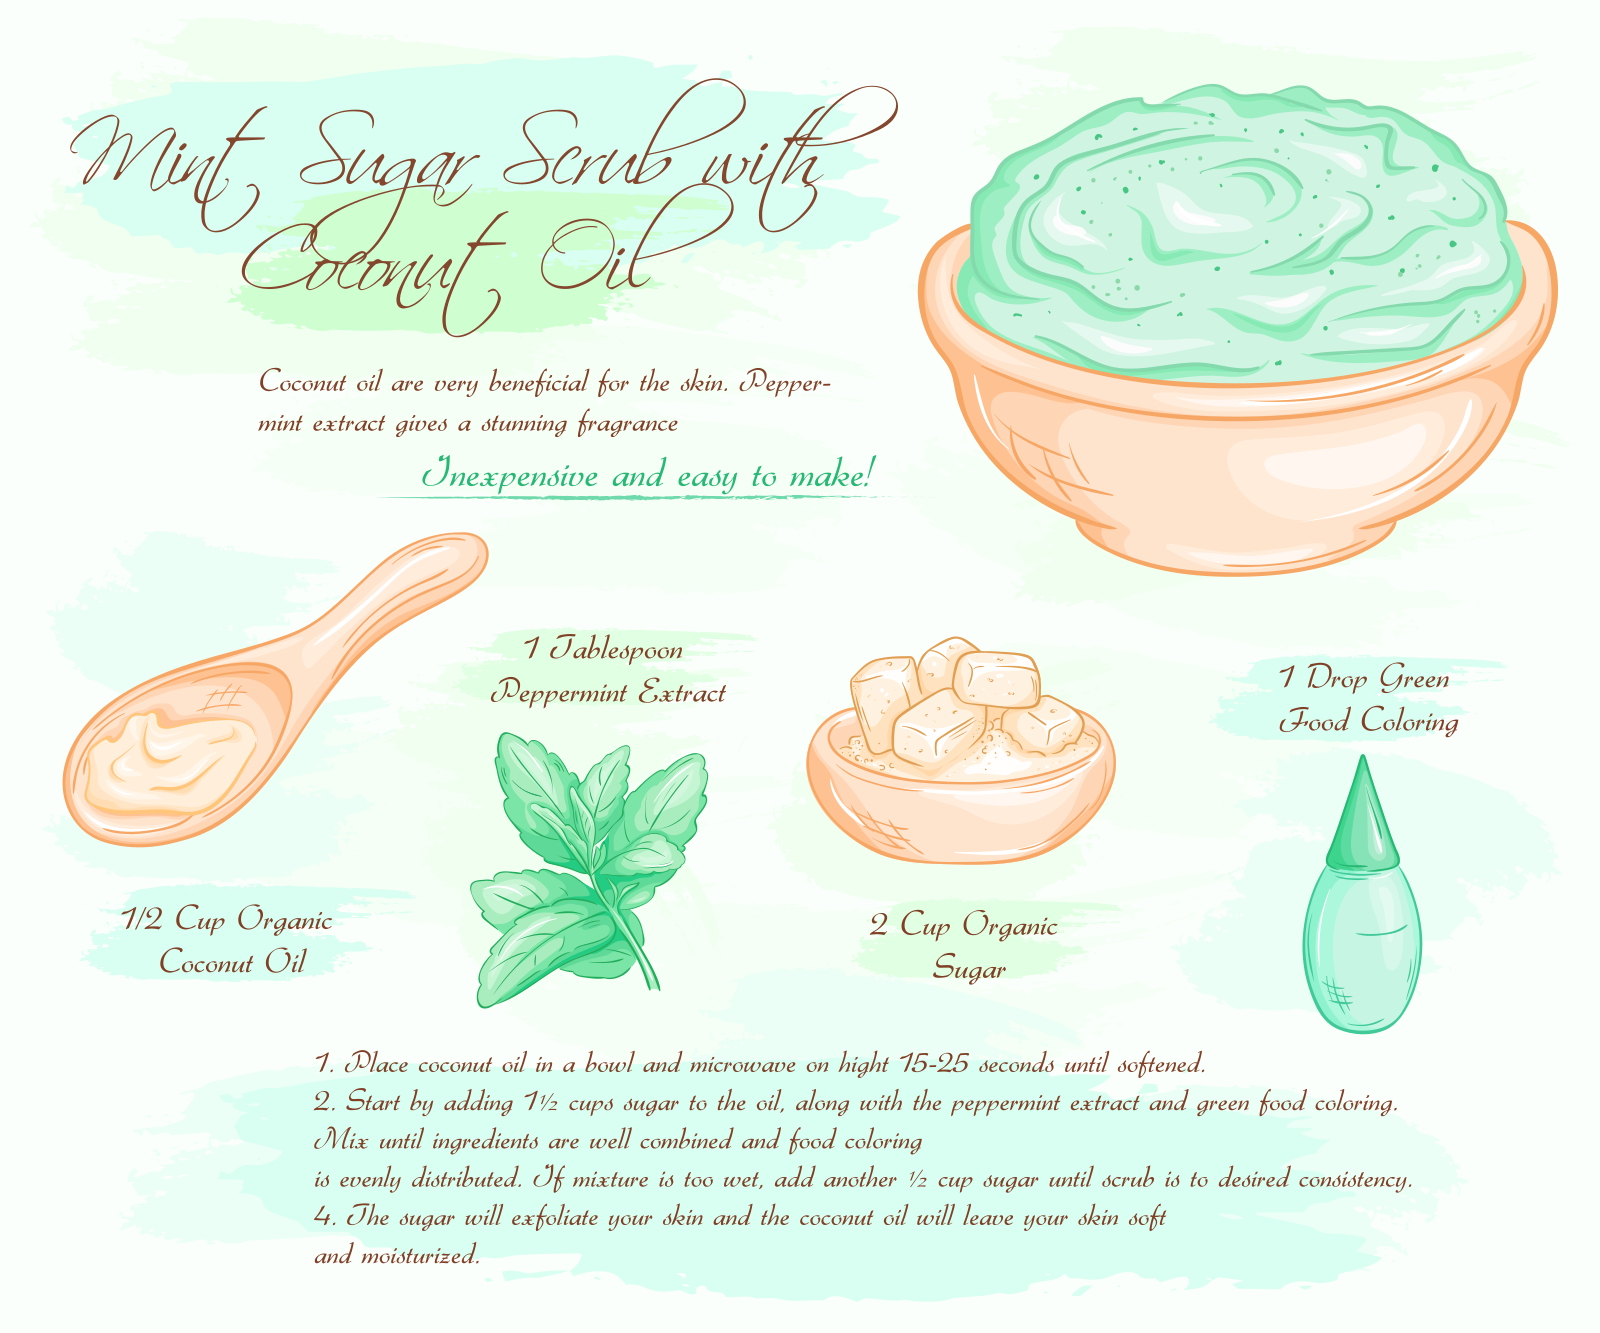 Recipe for mint sugar scrub with coconut, by PH Design, home builders specializing in custom home design and construction in Canton, Ohio